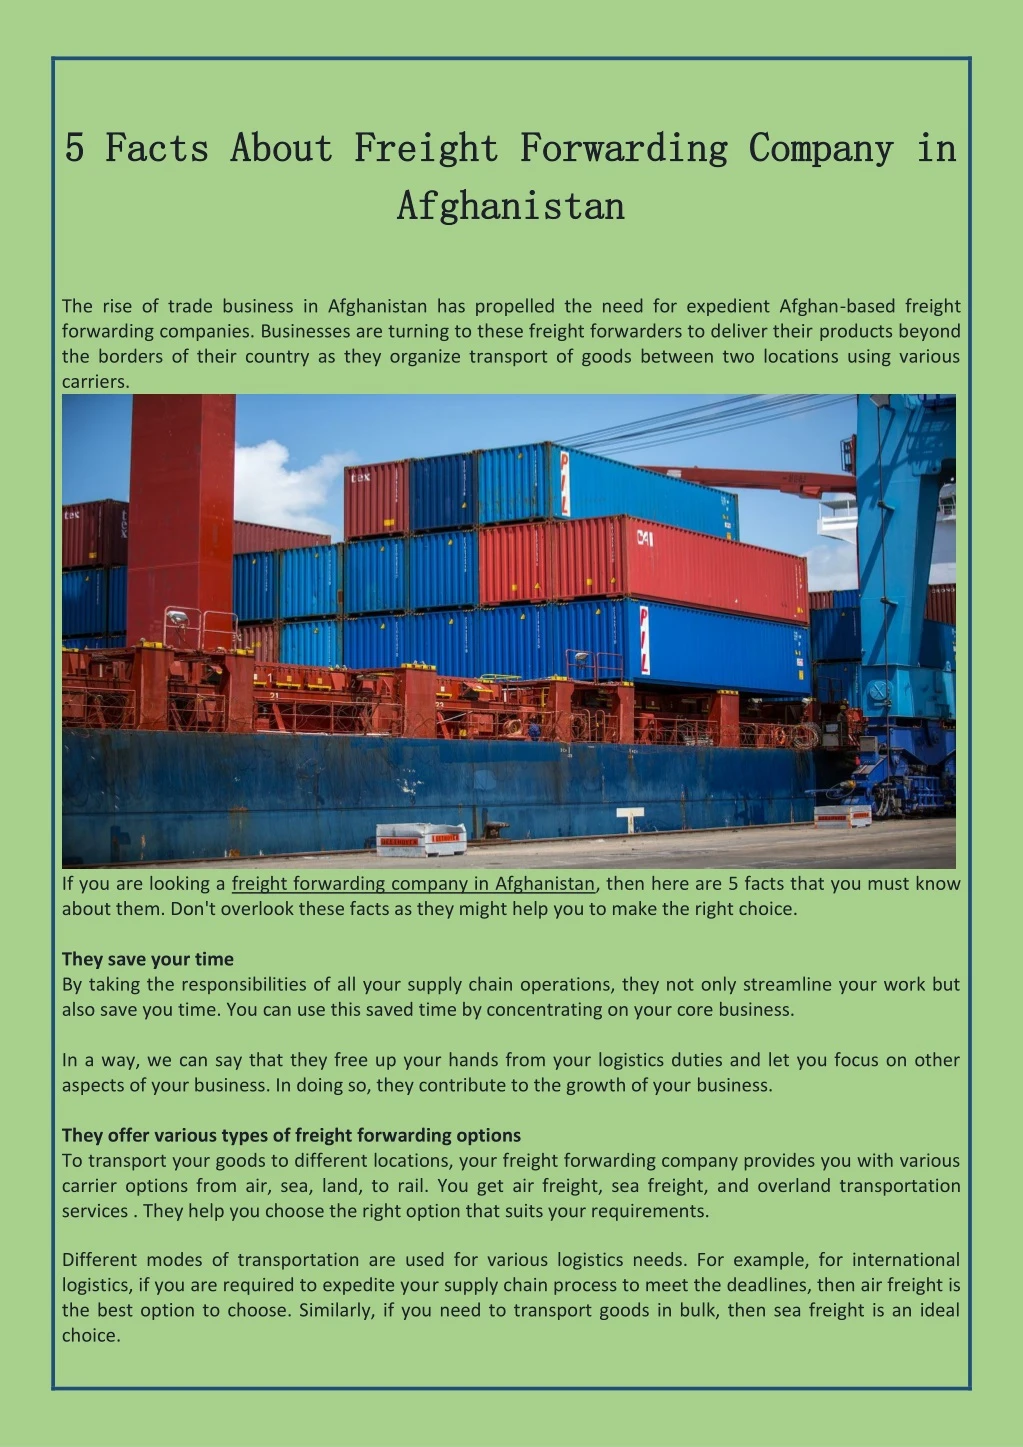 5 facts about freight forwarding company